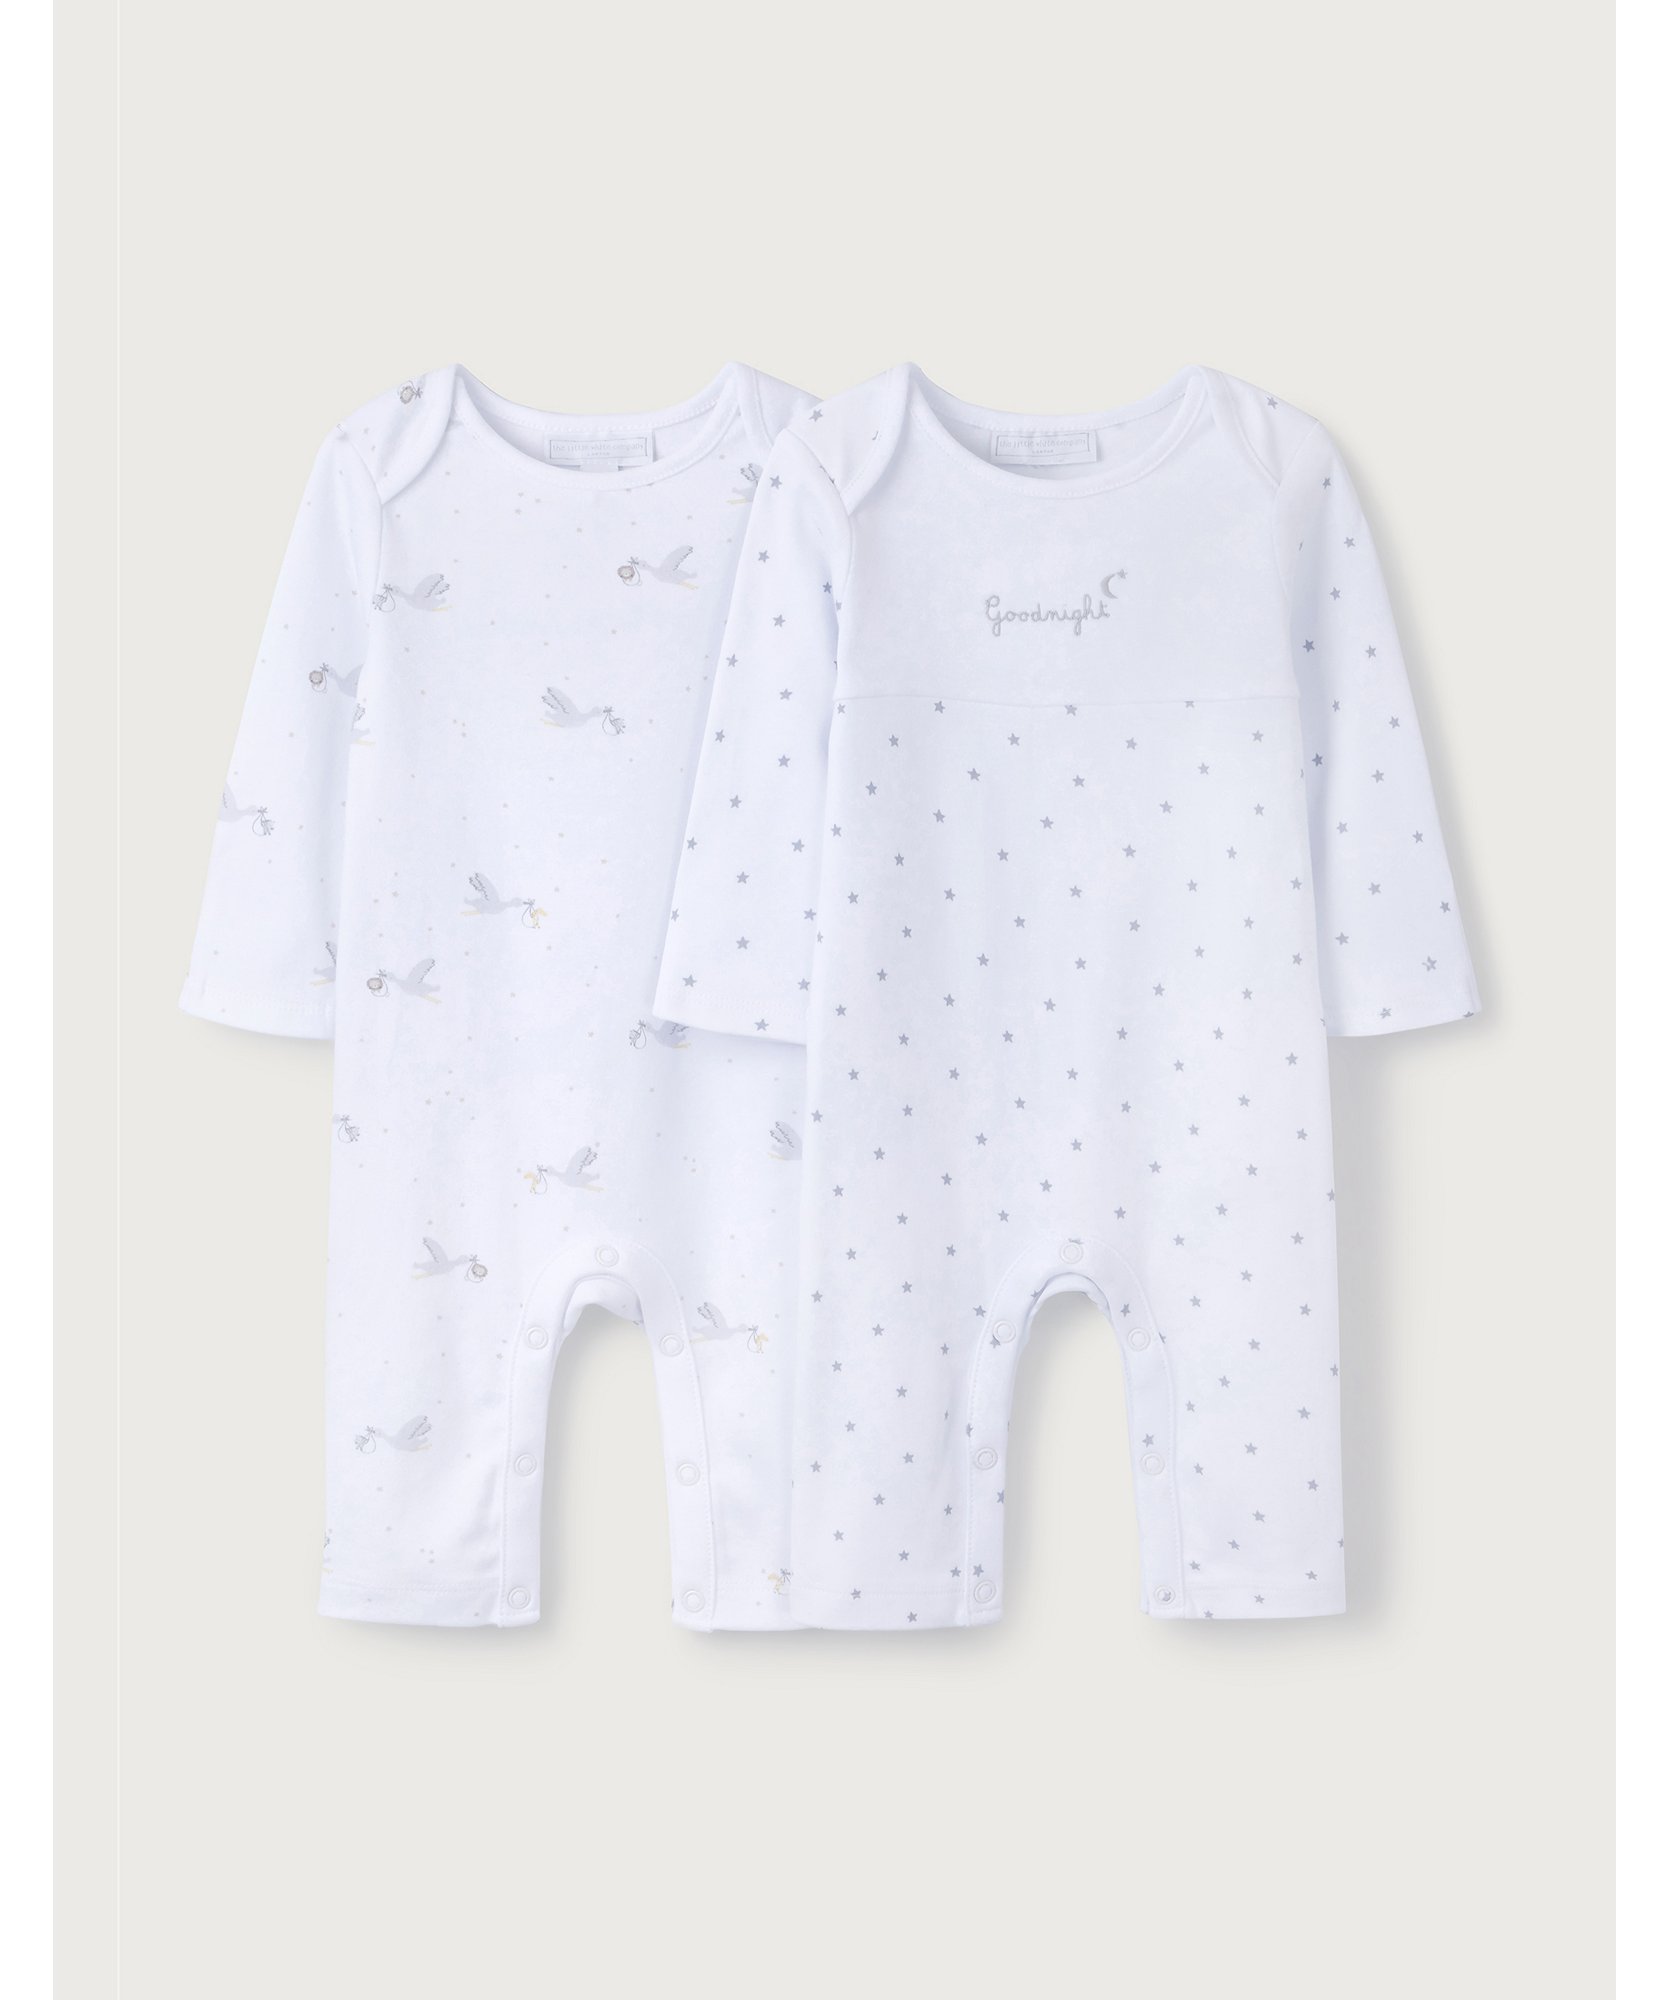 1 1/2-2Y Stork-Print & Star Sleepsuits – Set Of 2 The White Company Clothing Loungewear Sleepsuits 